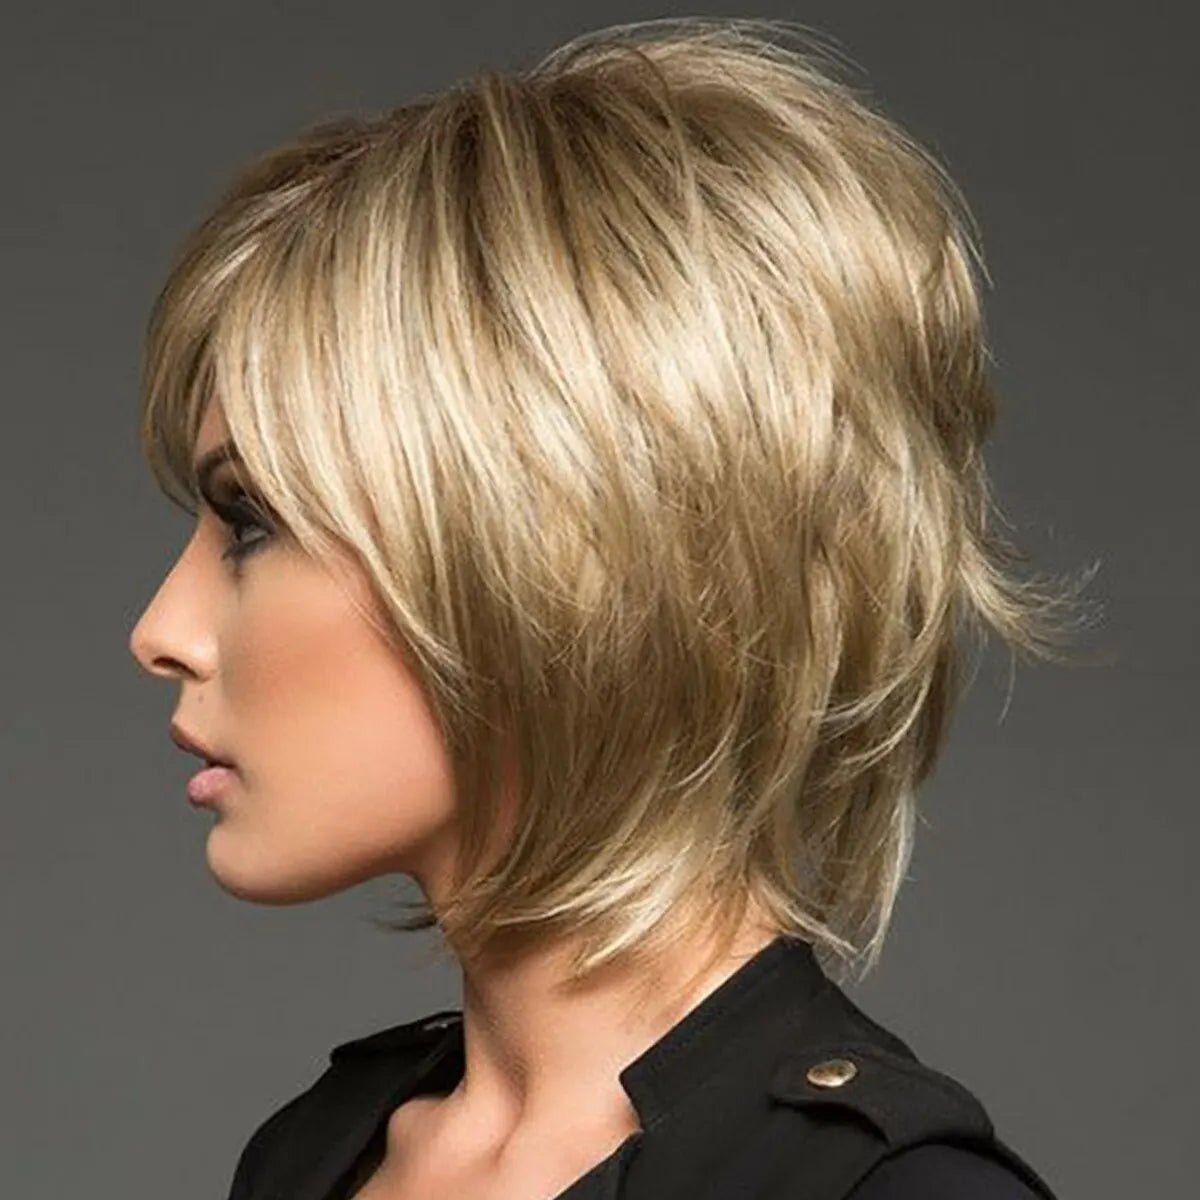 Discover Effortless Elegance with Blonde Bob Style Wigs